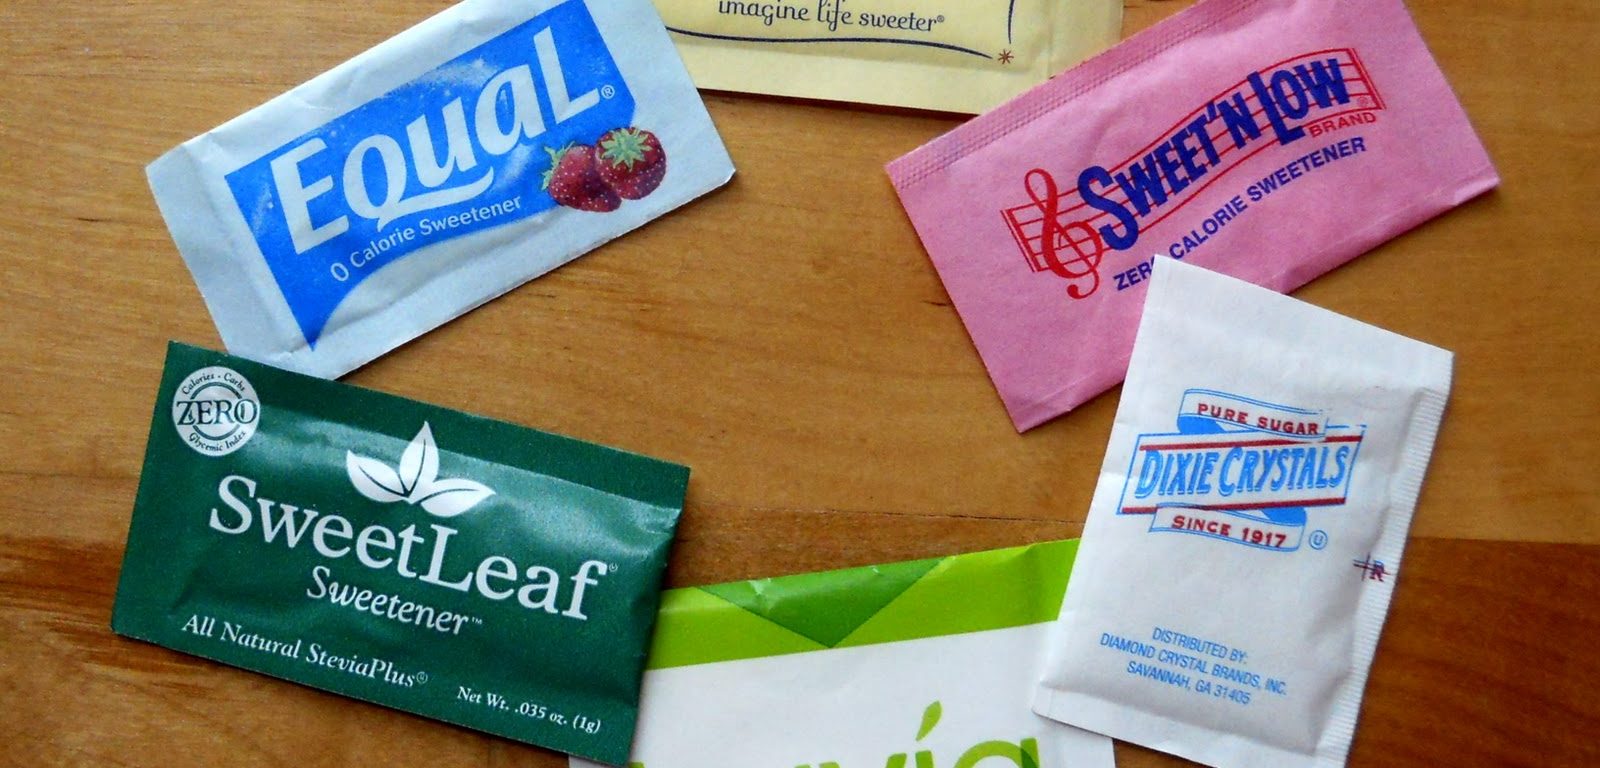 Are artificial sweeteners safe in diabetes?